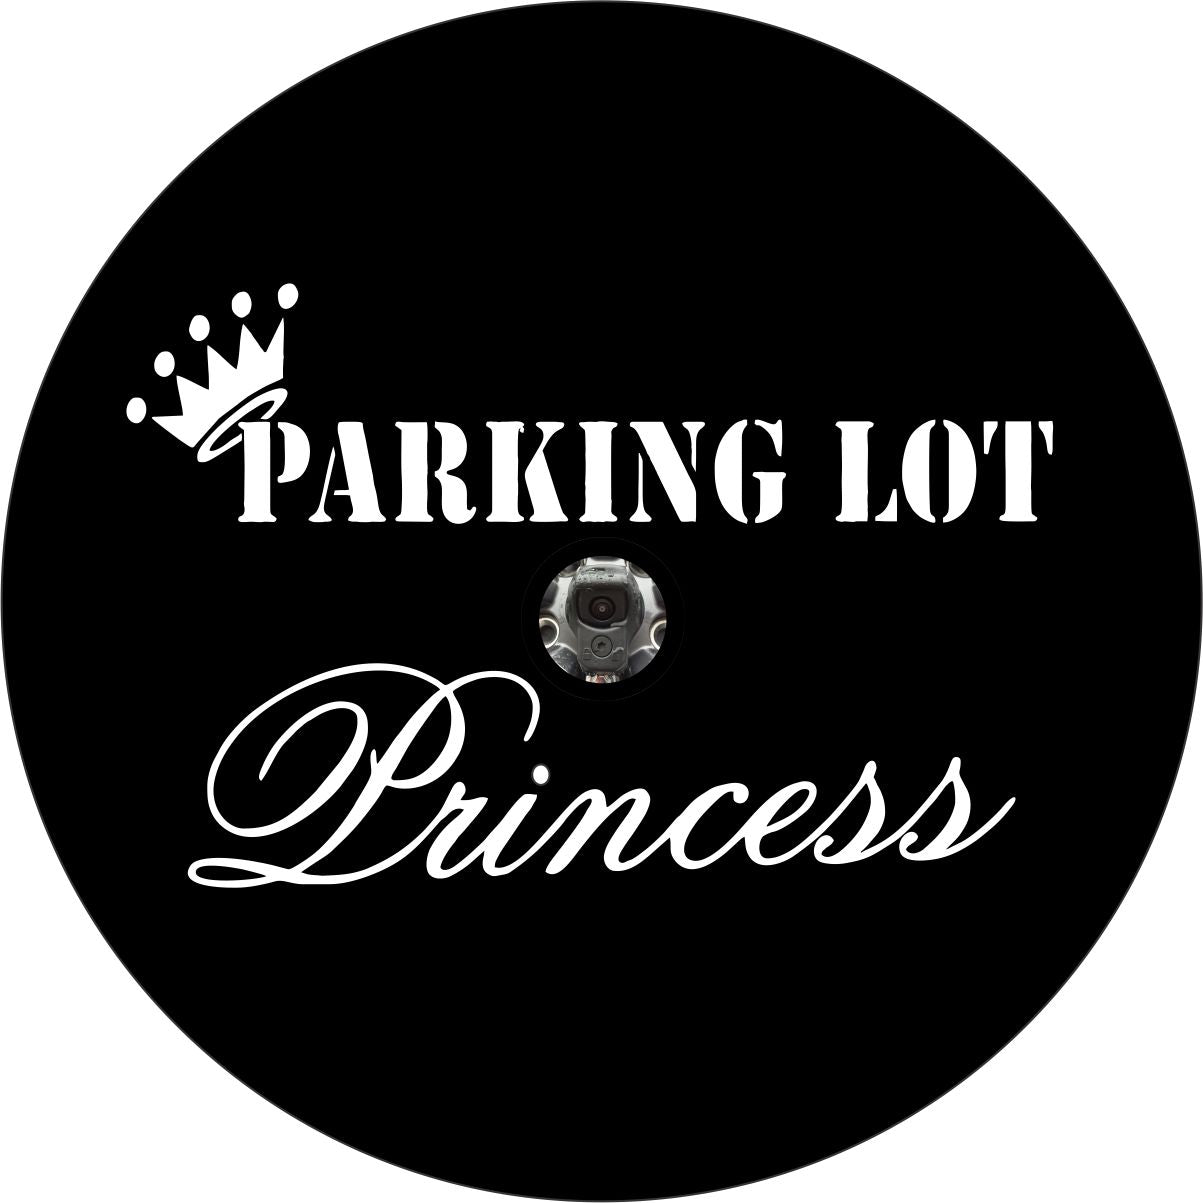 The words parking lot princess with a crown graphic on the P of parking mock up design of a black vinyl spare tire cover with a center hole space for a backup camera.